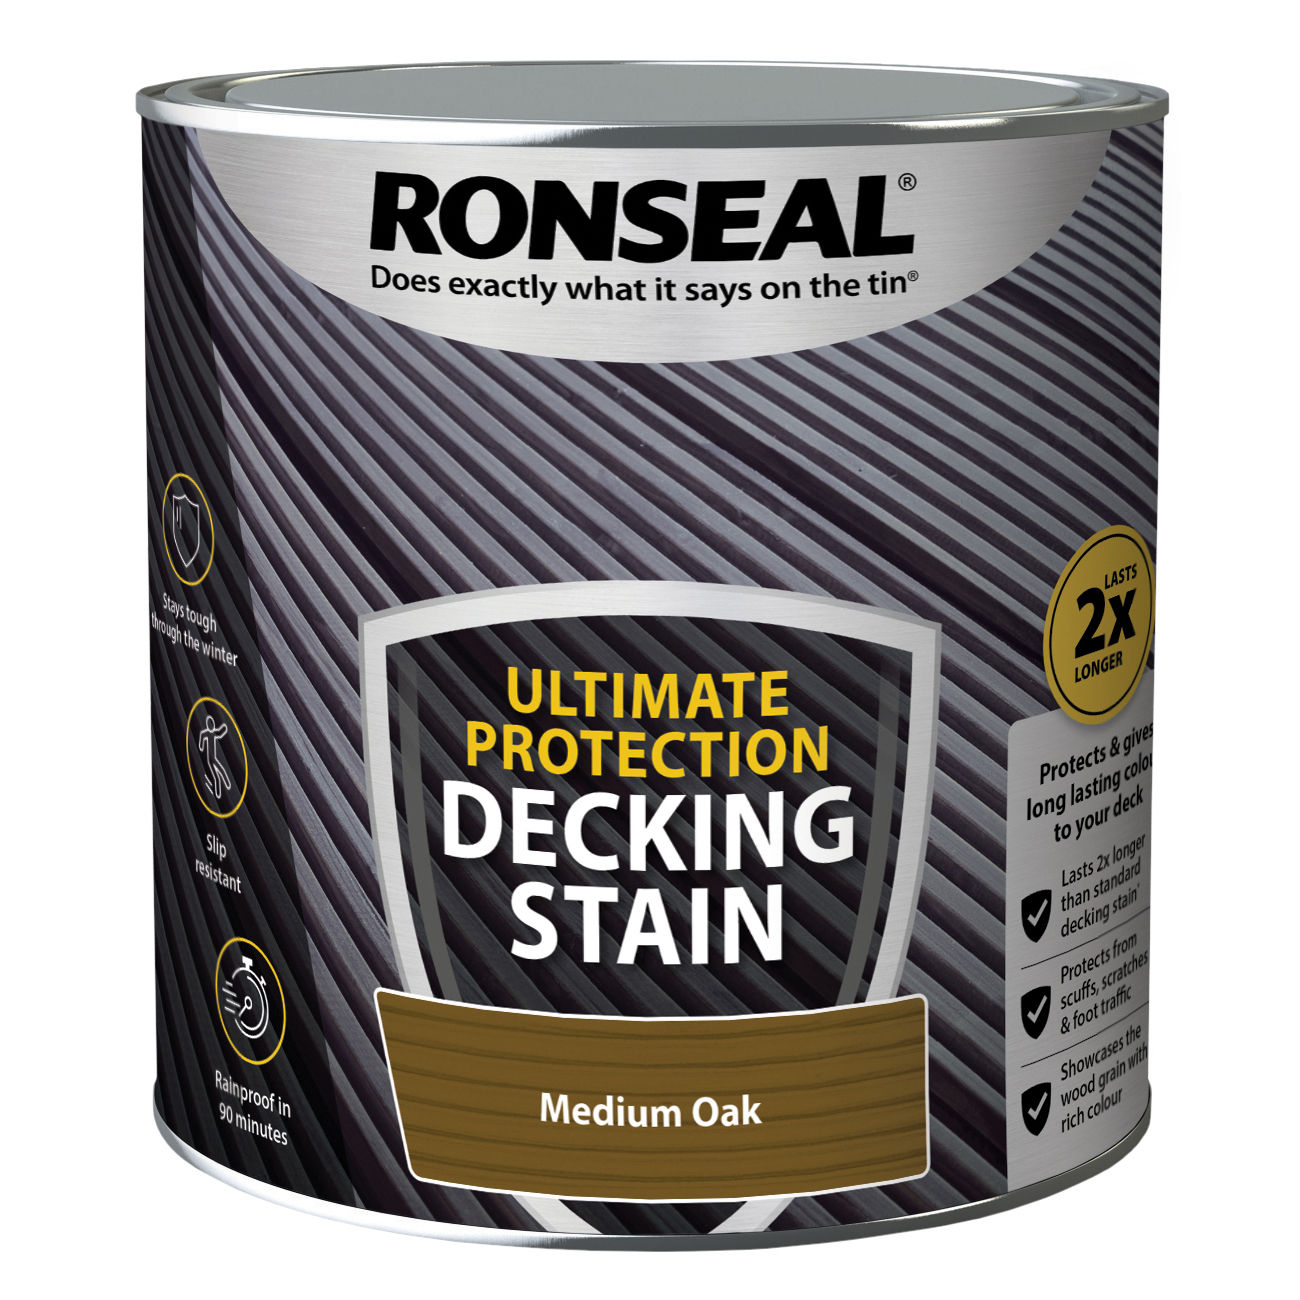 Ronseal Ultimate Protection Decking Stain - Medium Oak (2.5L)